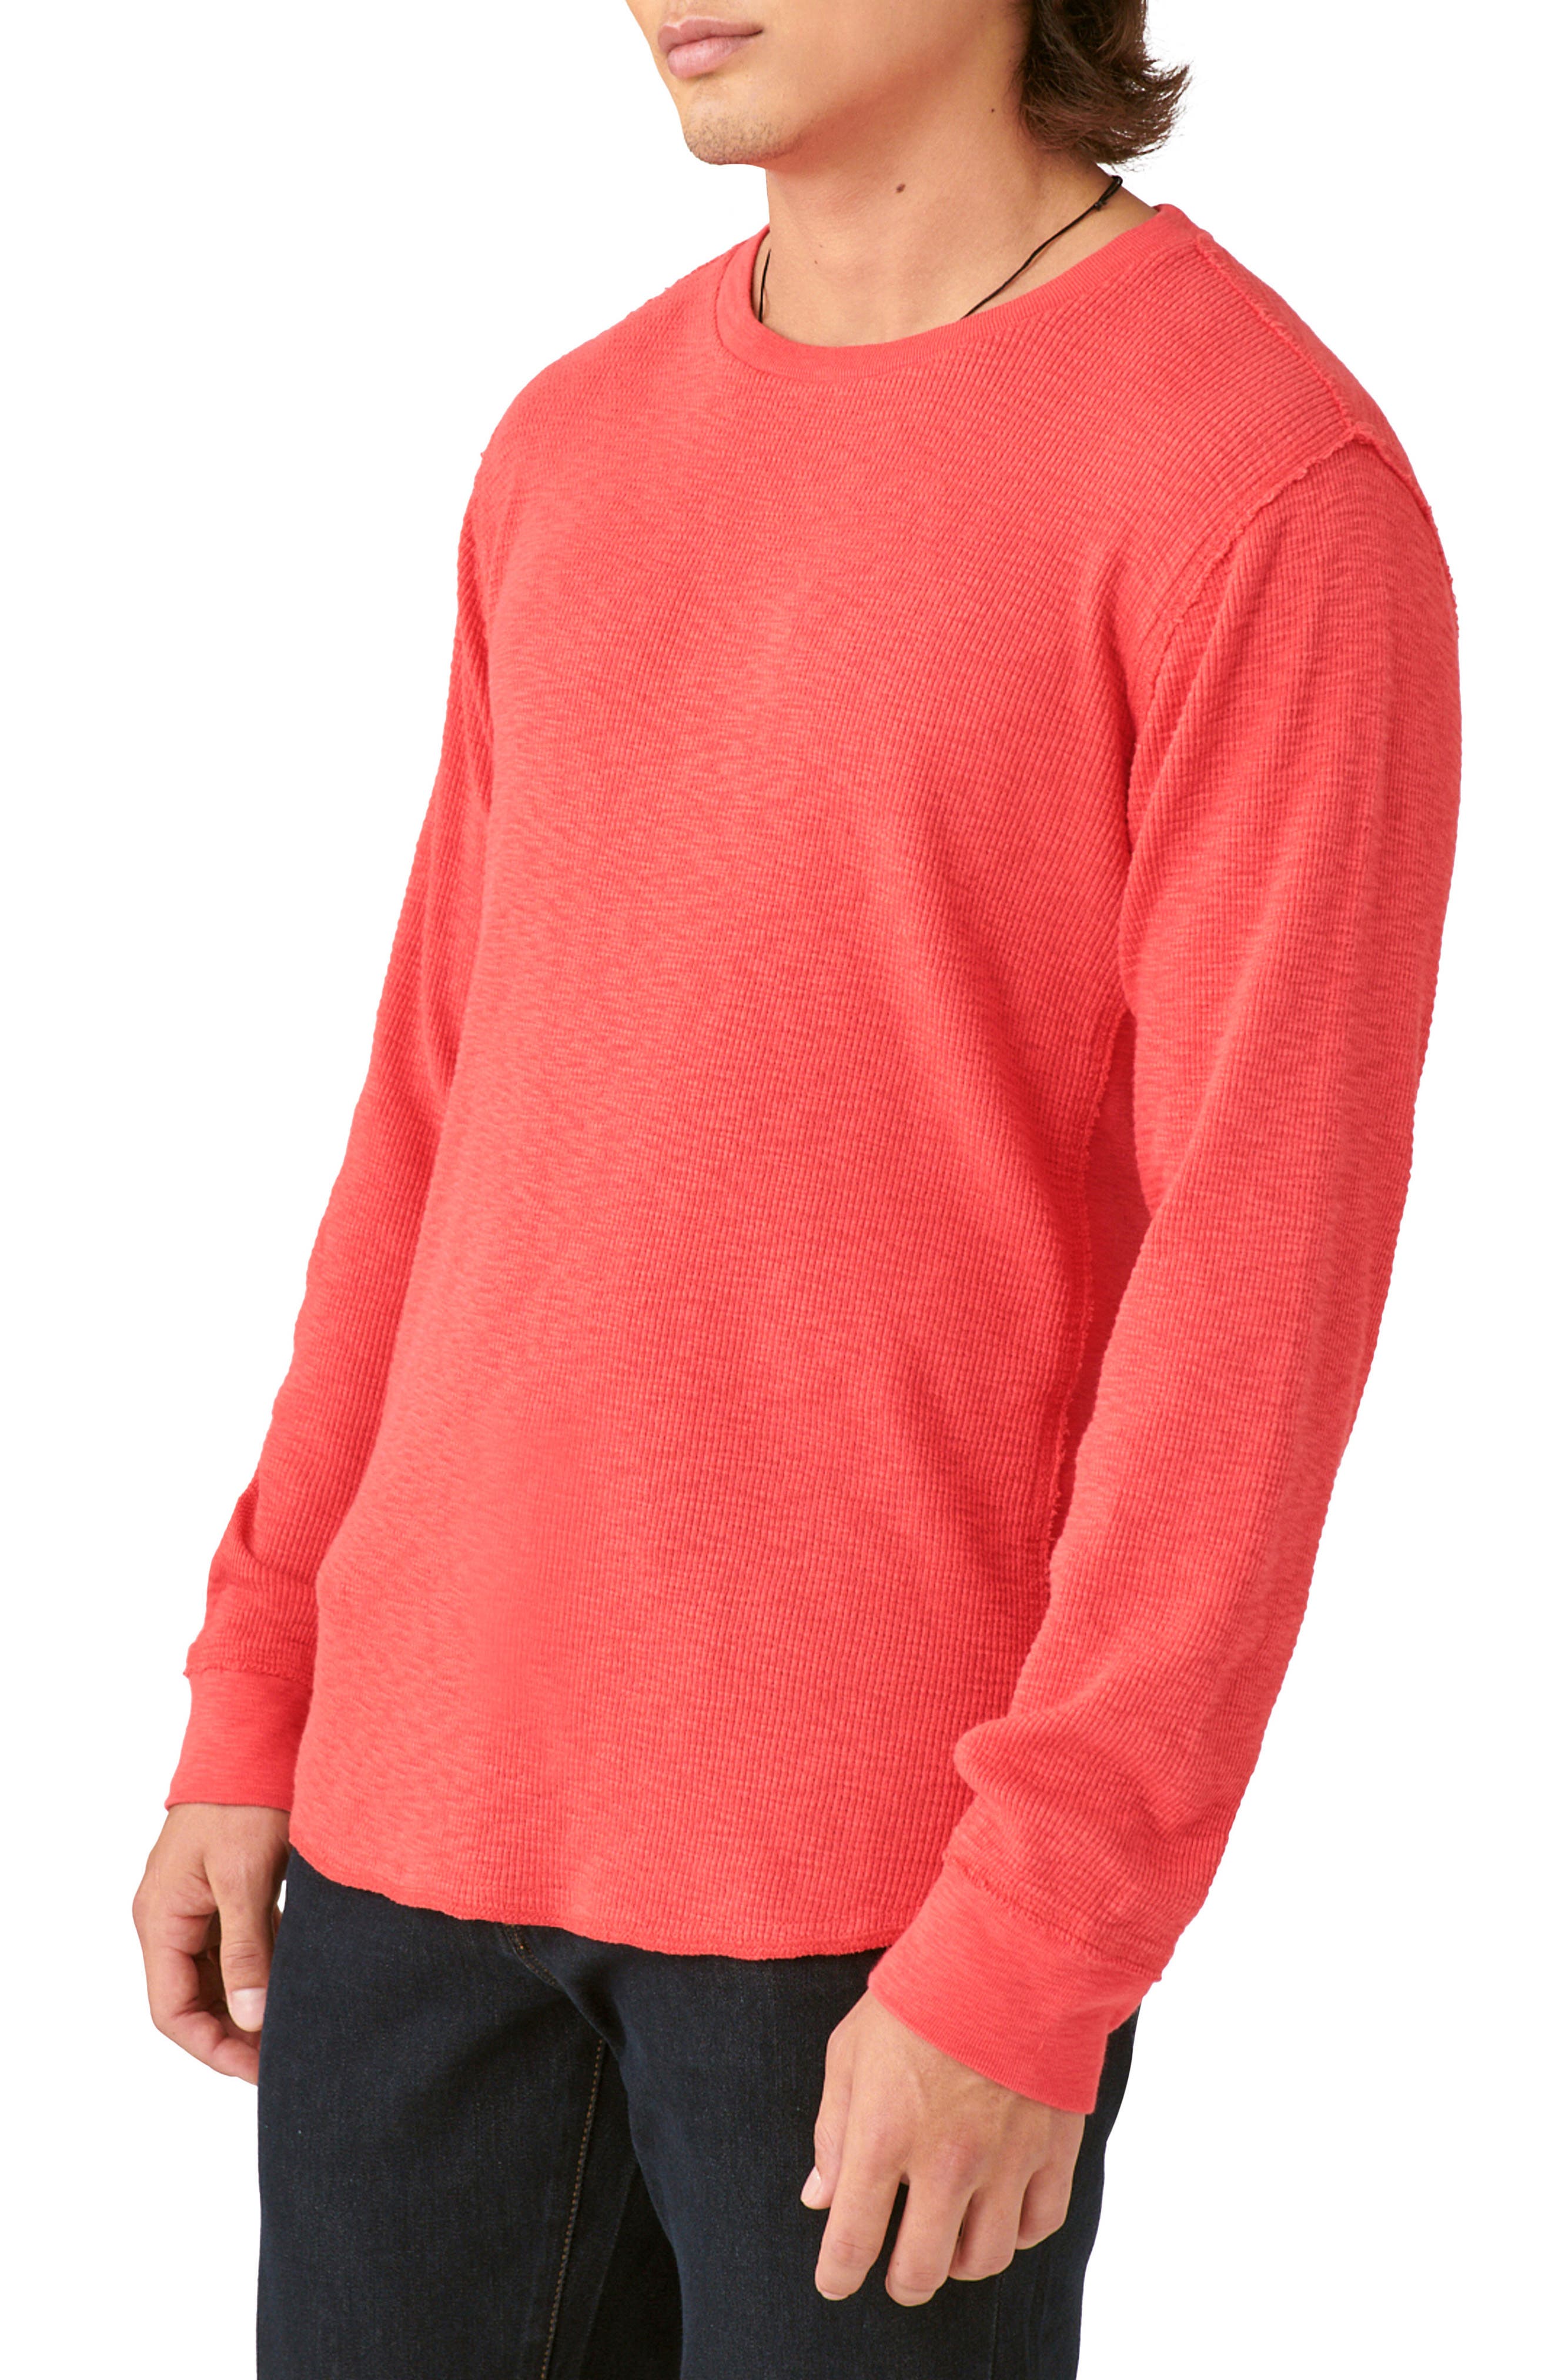 Lucky Brand Garment Dye Thermal Cotton Top in True Red